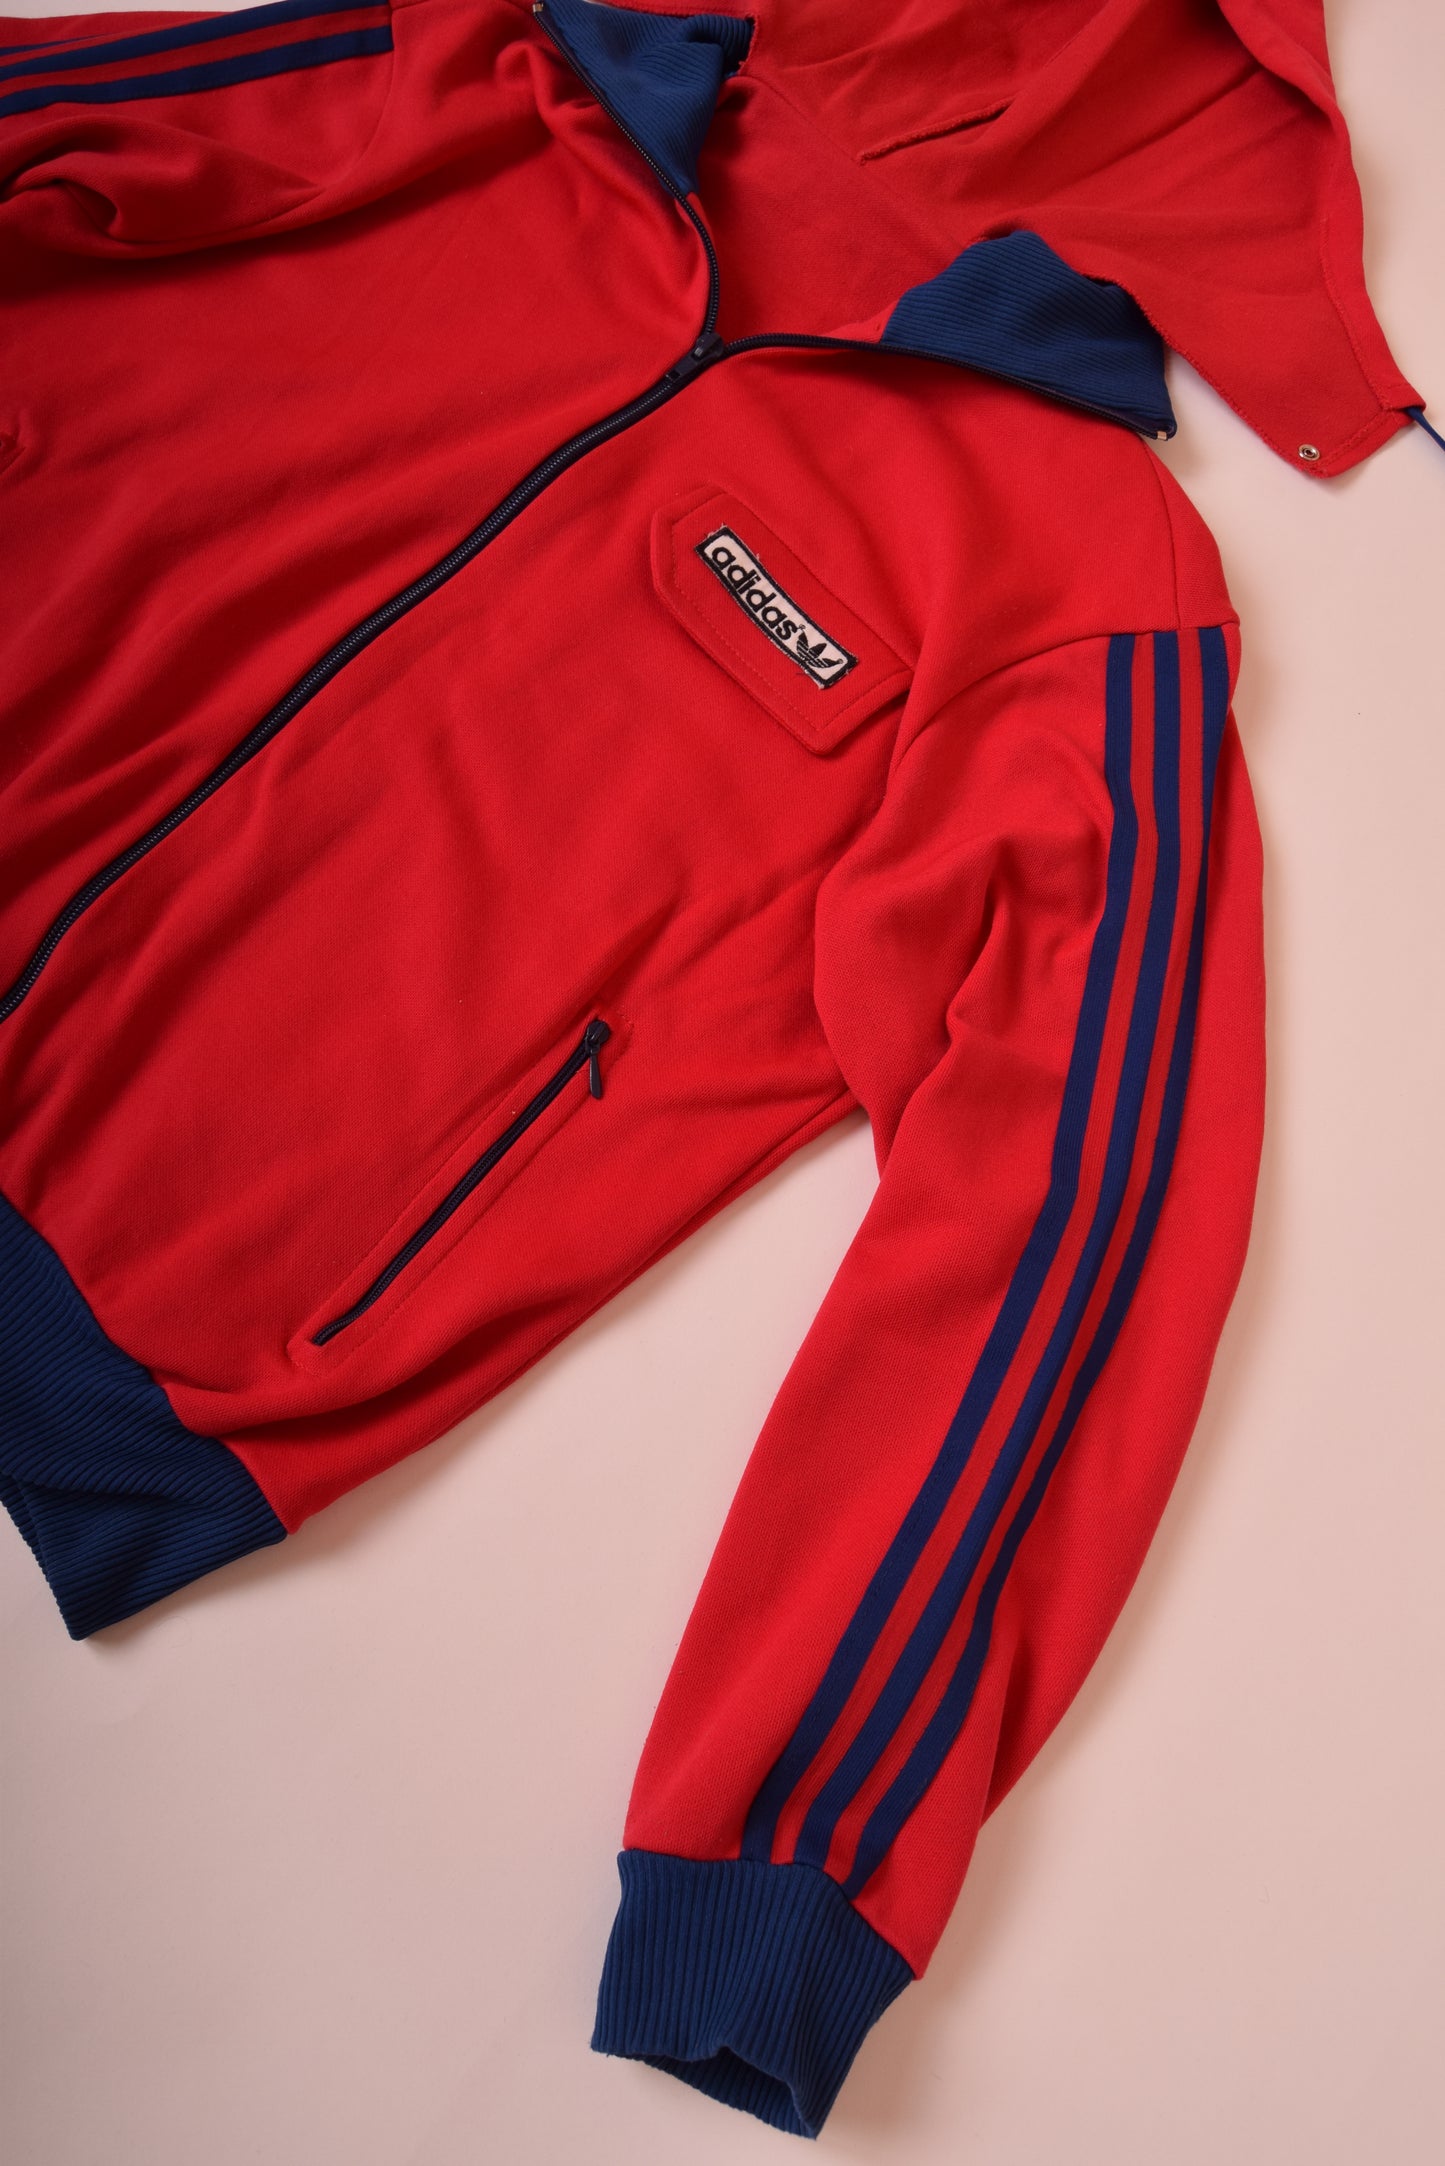 Vintage 70's Adidas Jacket/Track top With Hoodie Red Made in Yugoslavia Size S-M